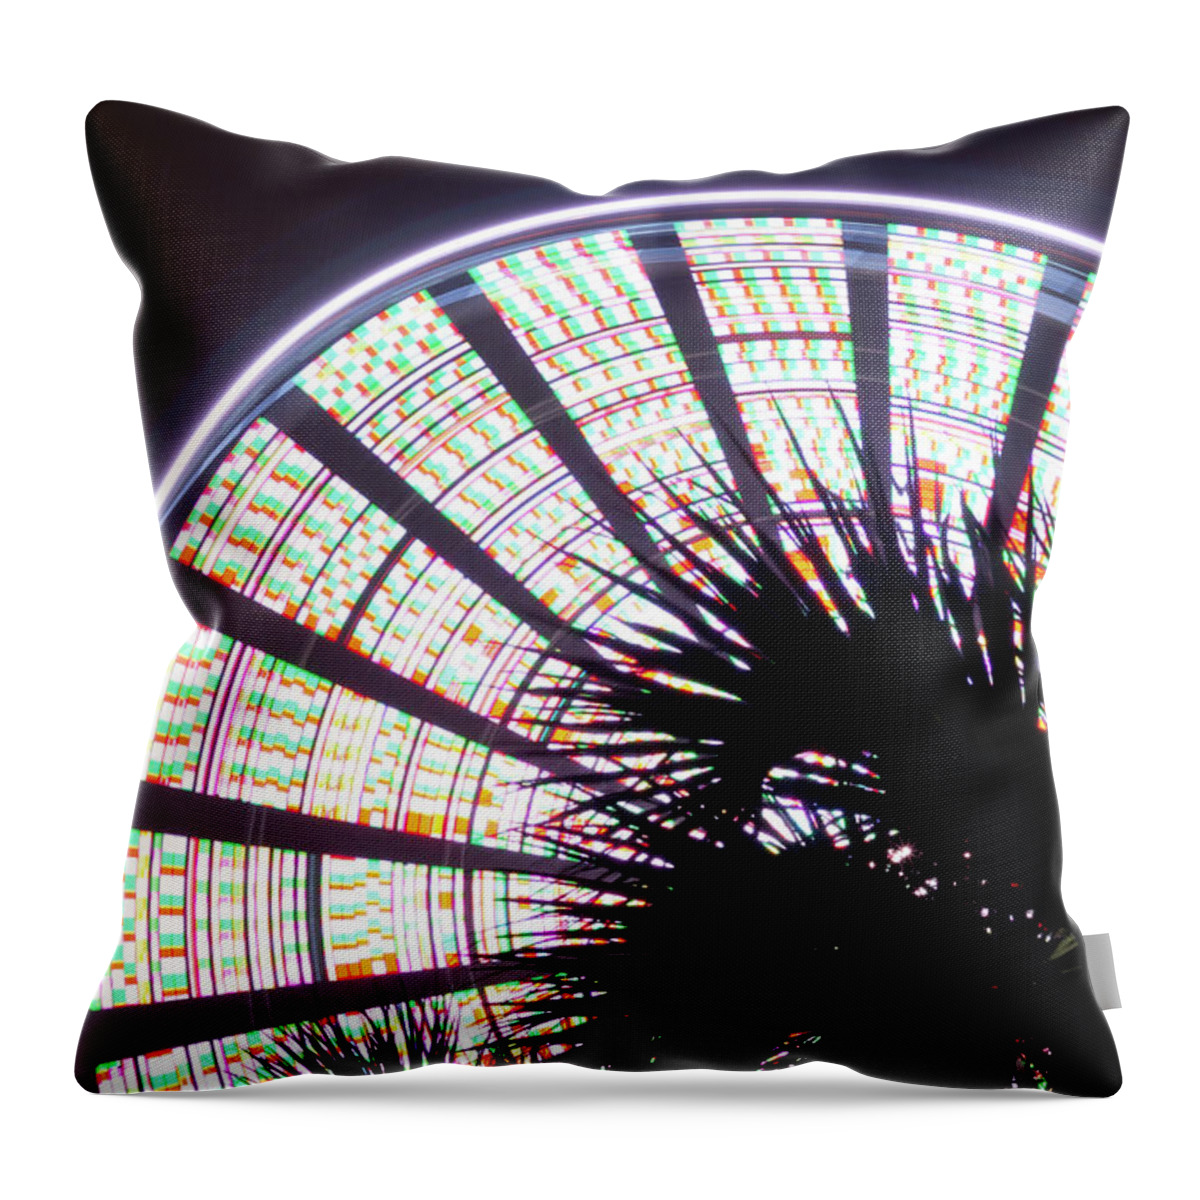 Skywheel Throw Pillow featuring the photograph Skywheel at Myrtle Beach by Dave Guy